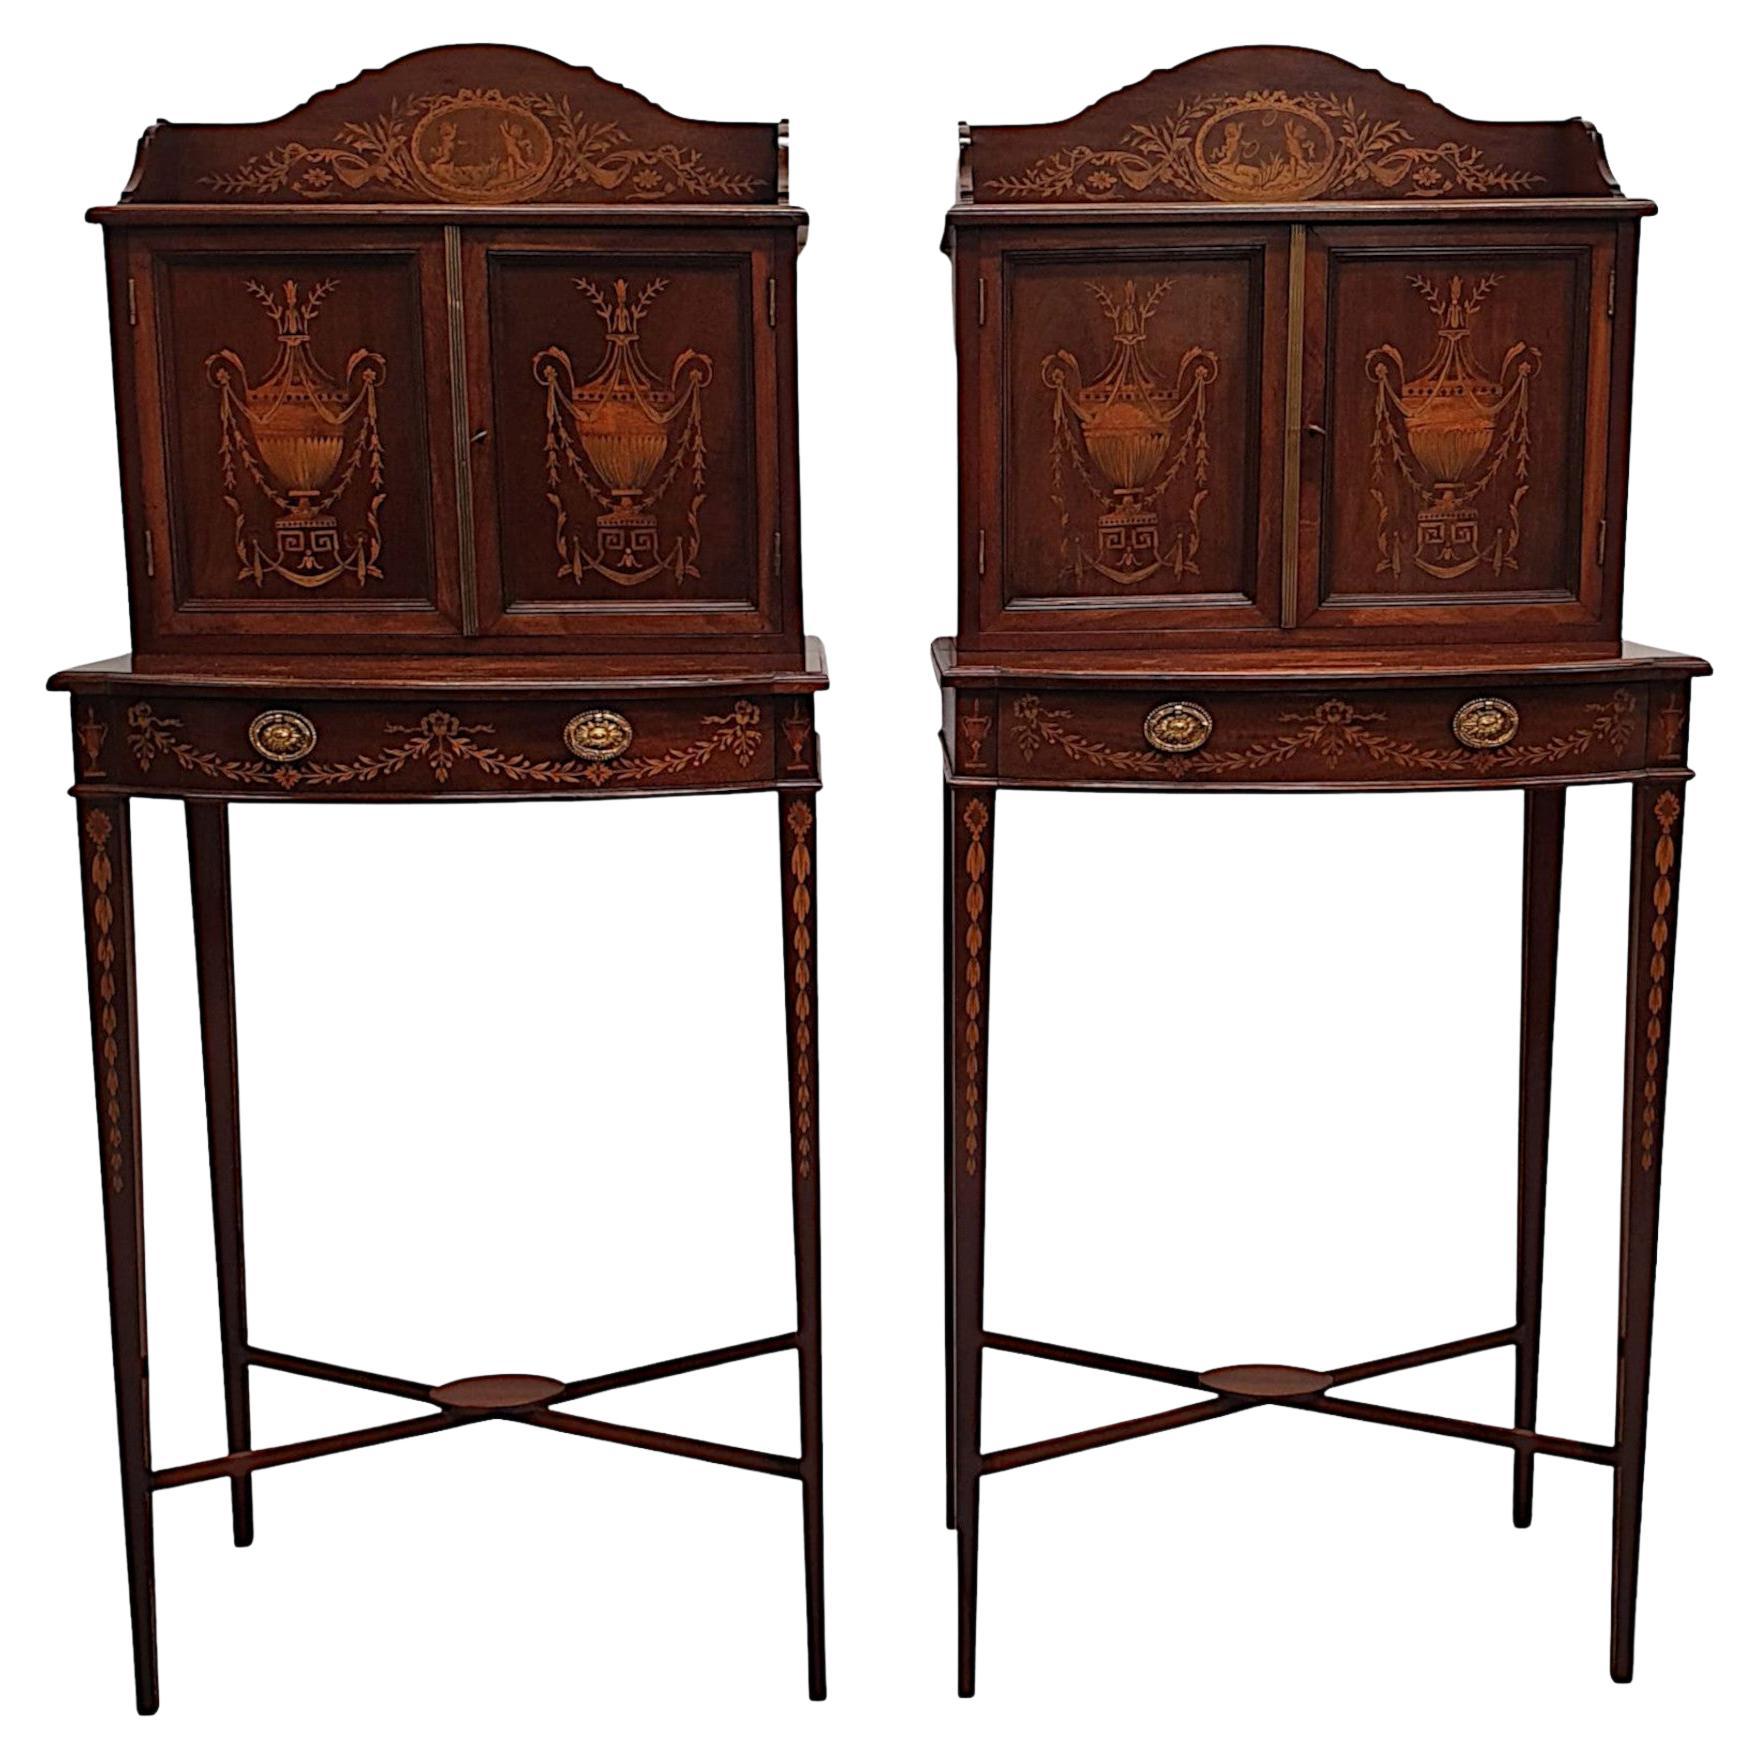  A Rare Pair of Exceptional Edwardian Cabinets Attributed to Edward and Roberts For Sale